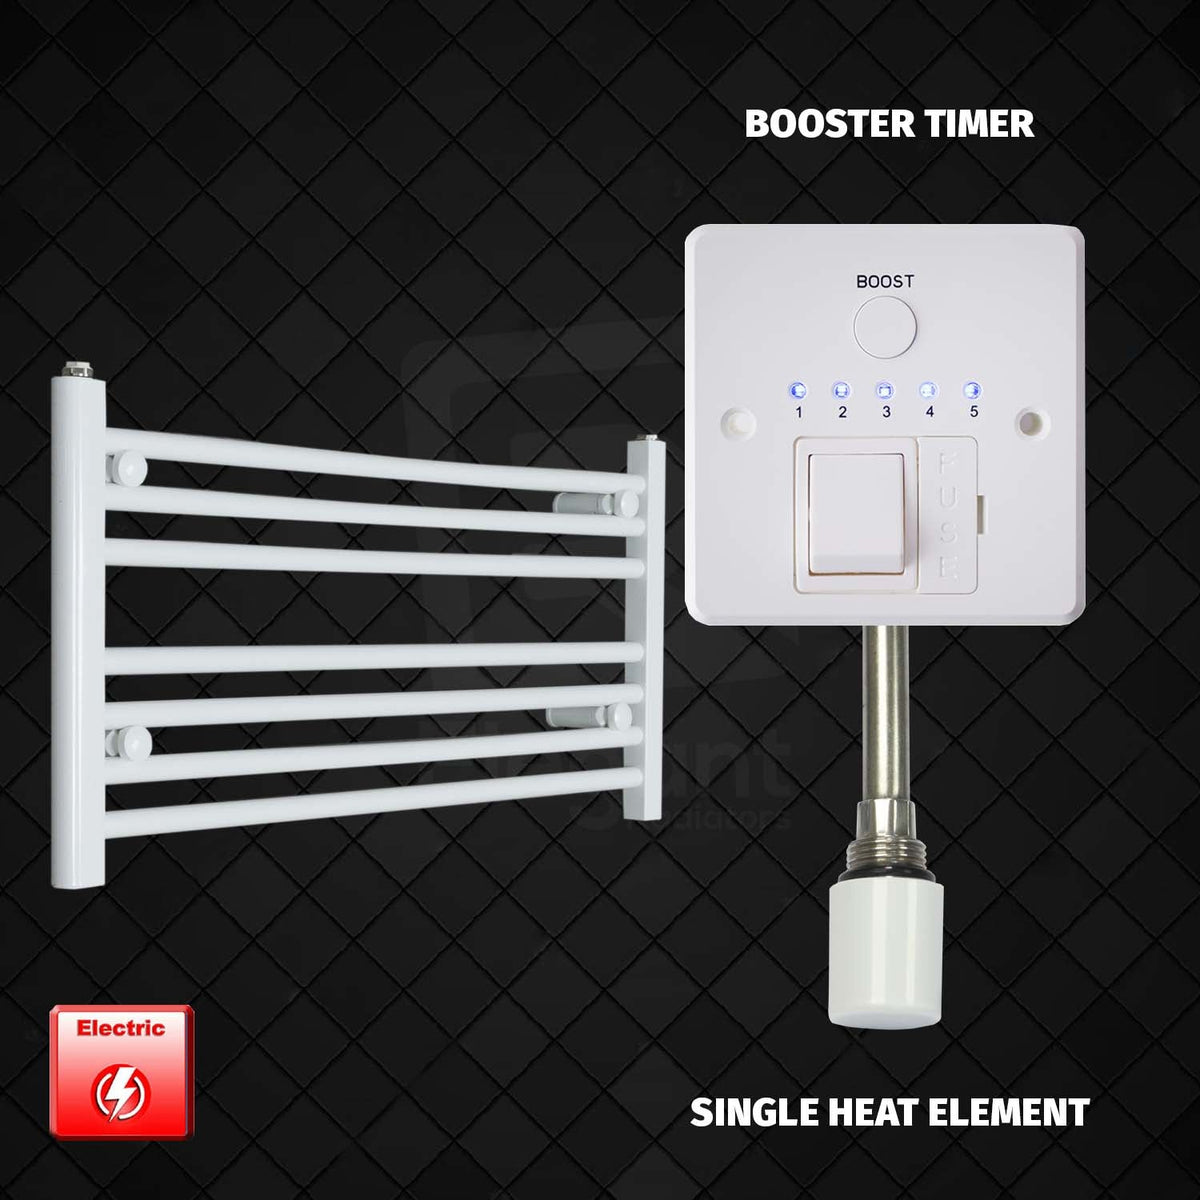 400 mm High 800 mm Wide Pre-Filled Electric Heated Towel Radiator White HTR Single heat element Booster timer